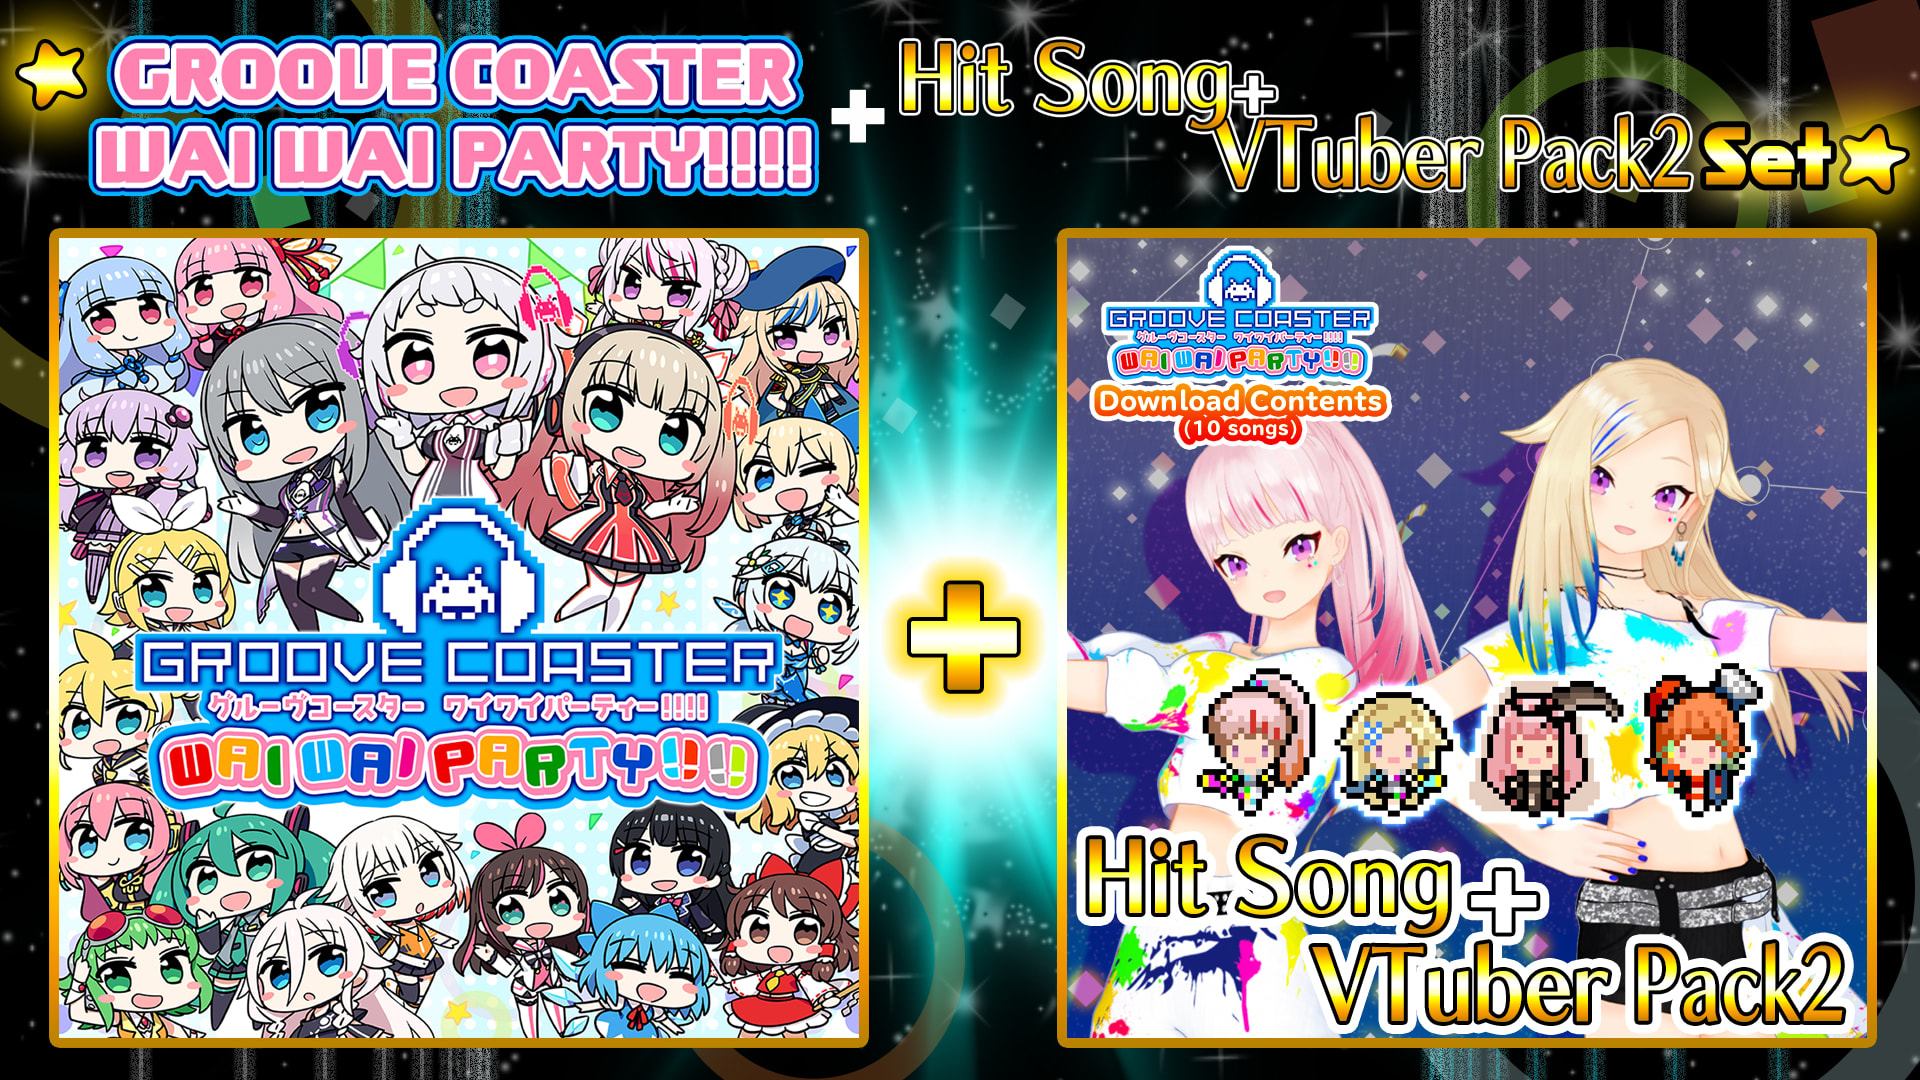 GROOVE COASTER WAI WAI PARTY!!!! + Hit Song+VTuber Pack 2 Set